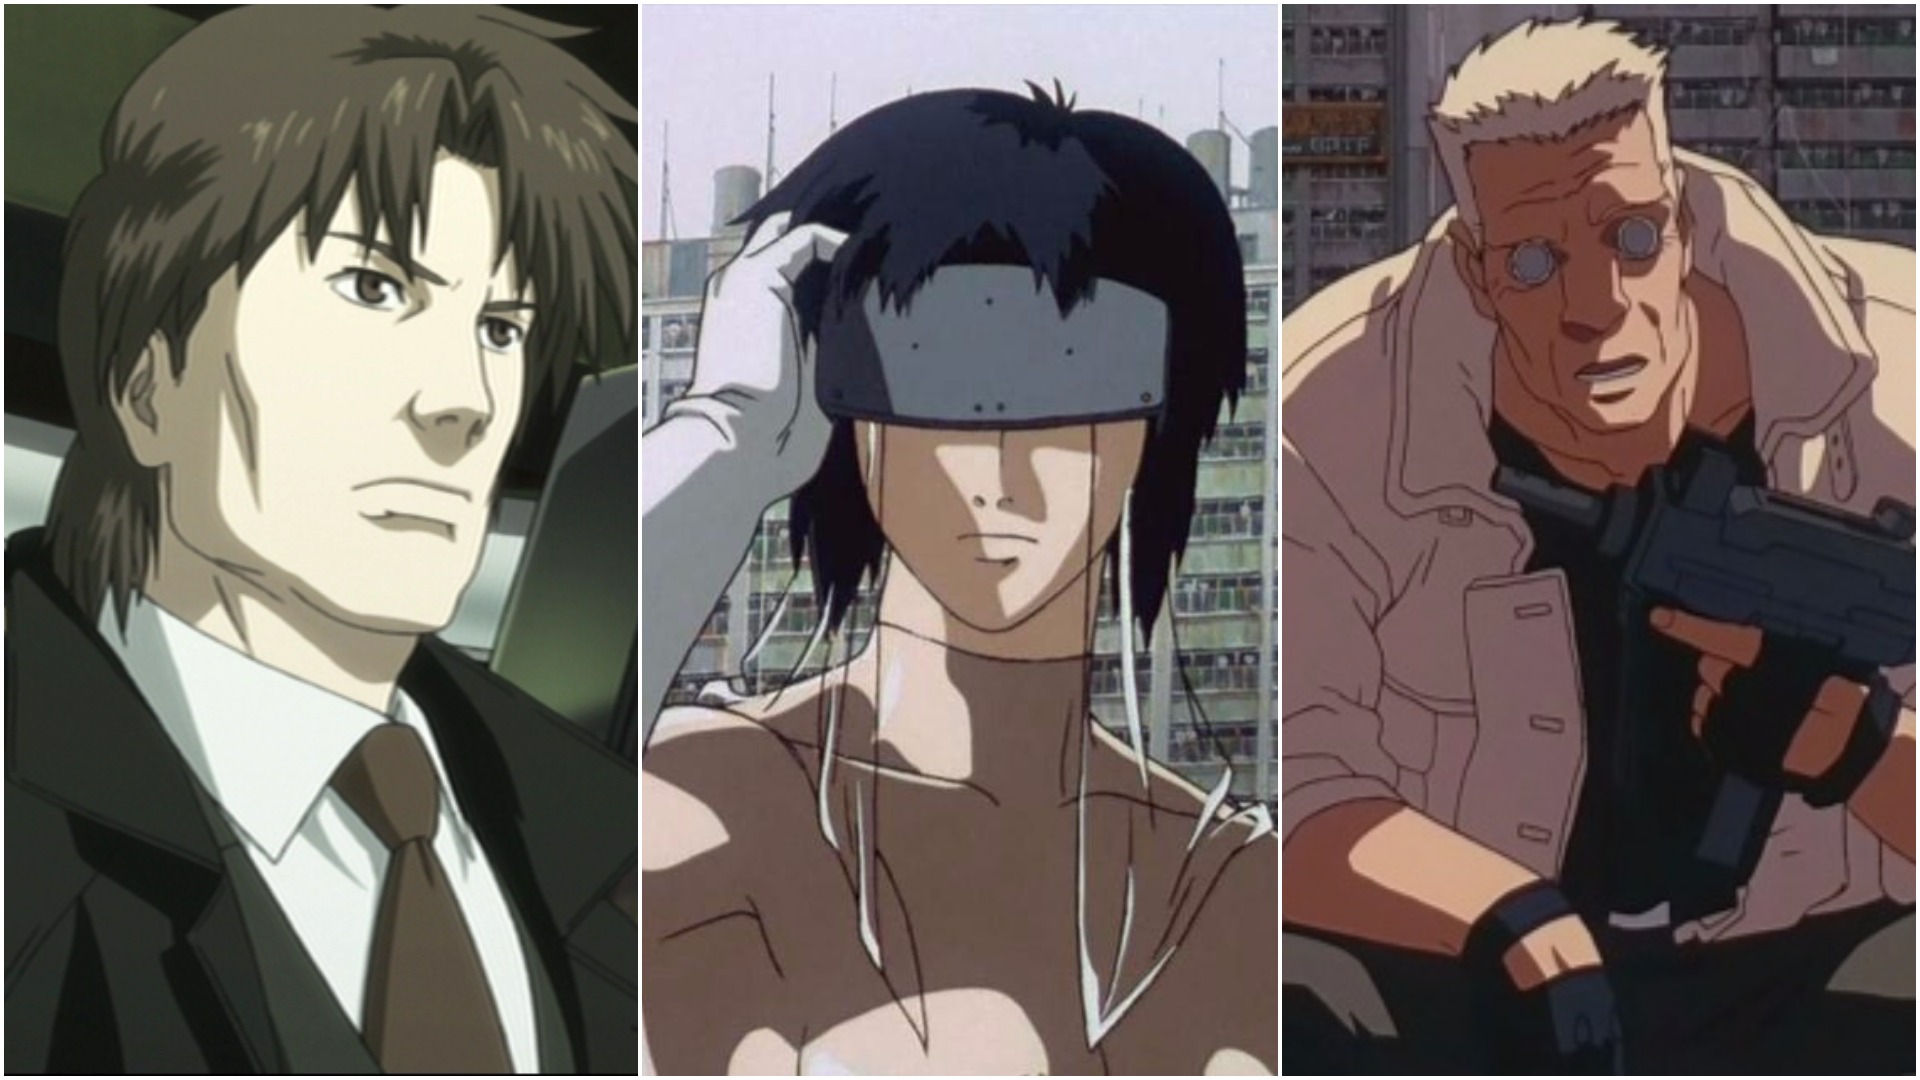 Original Ghost In The Shell Anime Actors Dubbing The Live-Action Movie In Japan 